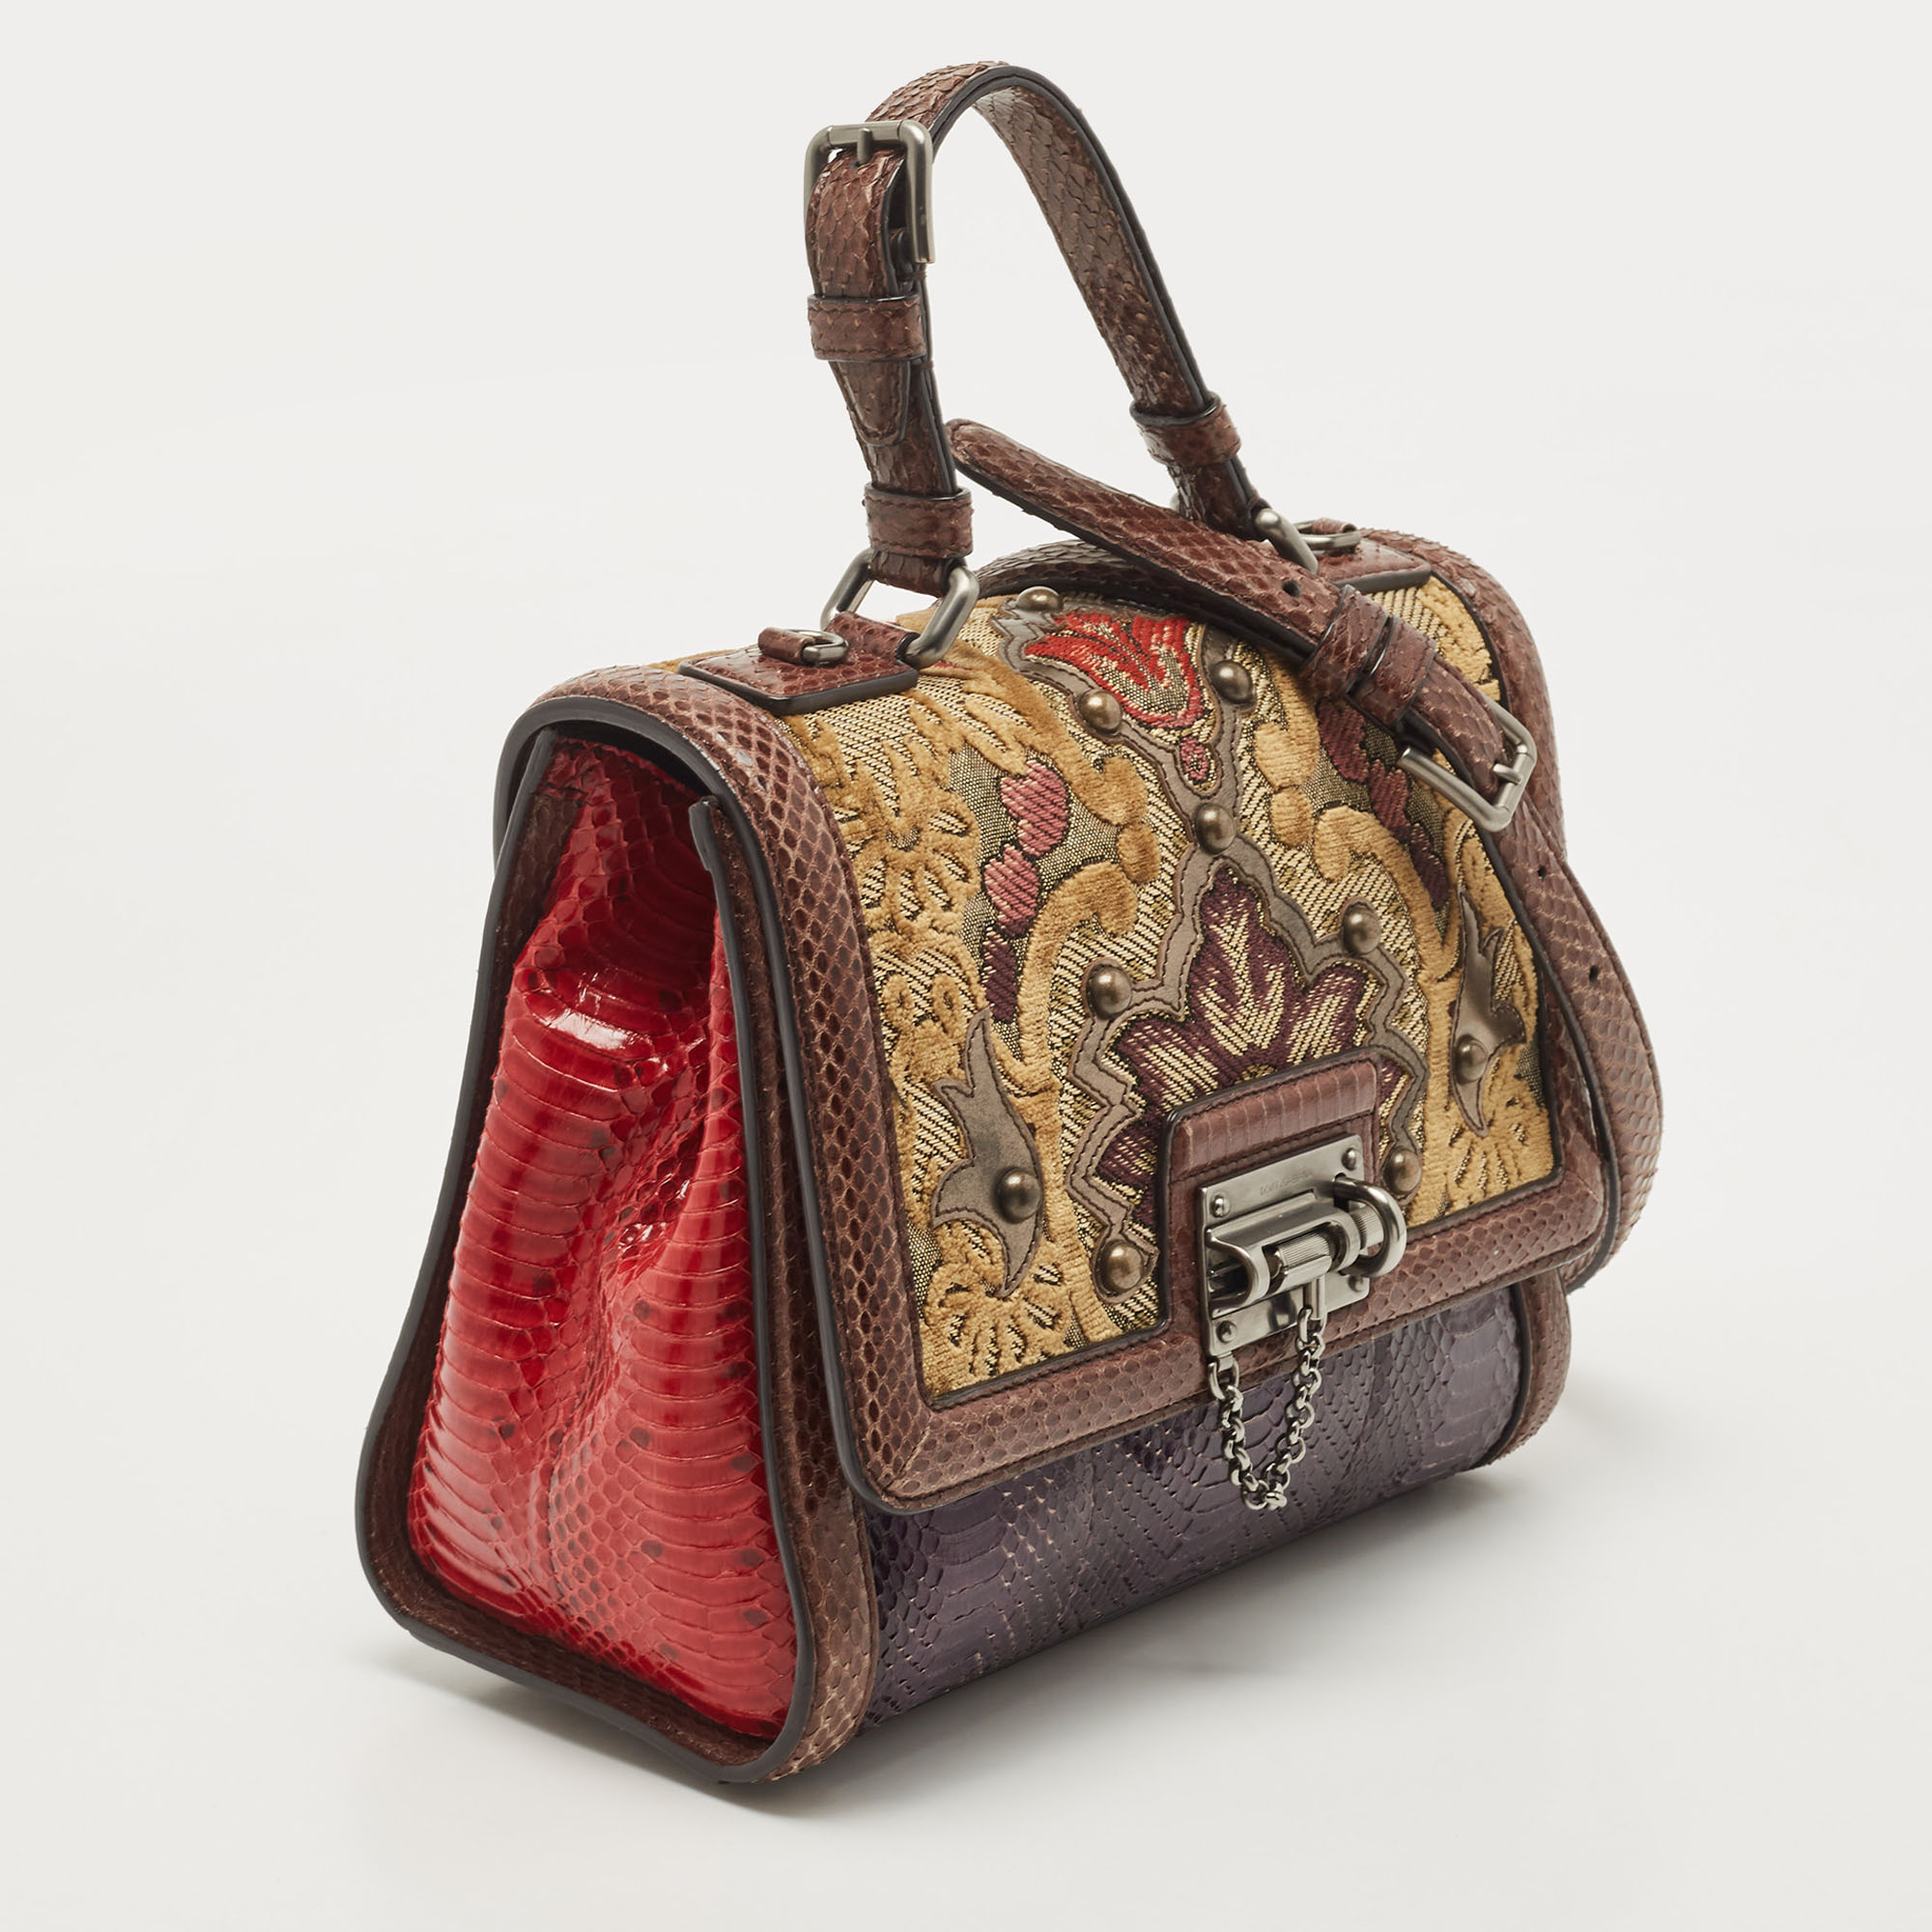 Dolce & Gabbana Multicolor Watersnake Leather And Brocade Fabric Medium Monica Top Handle Bag